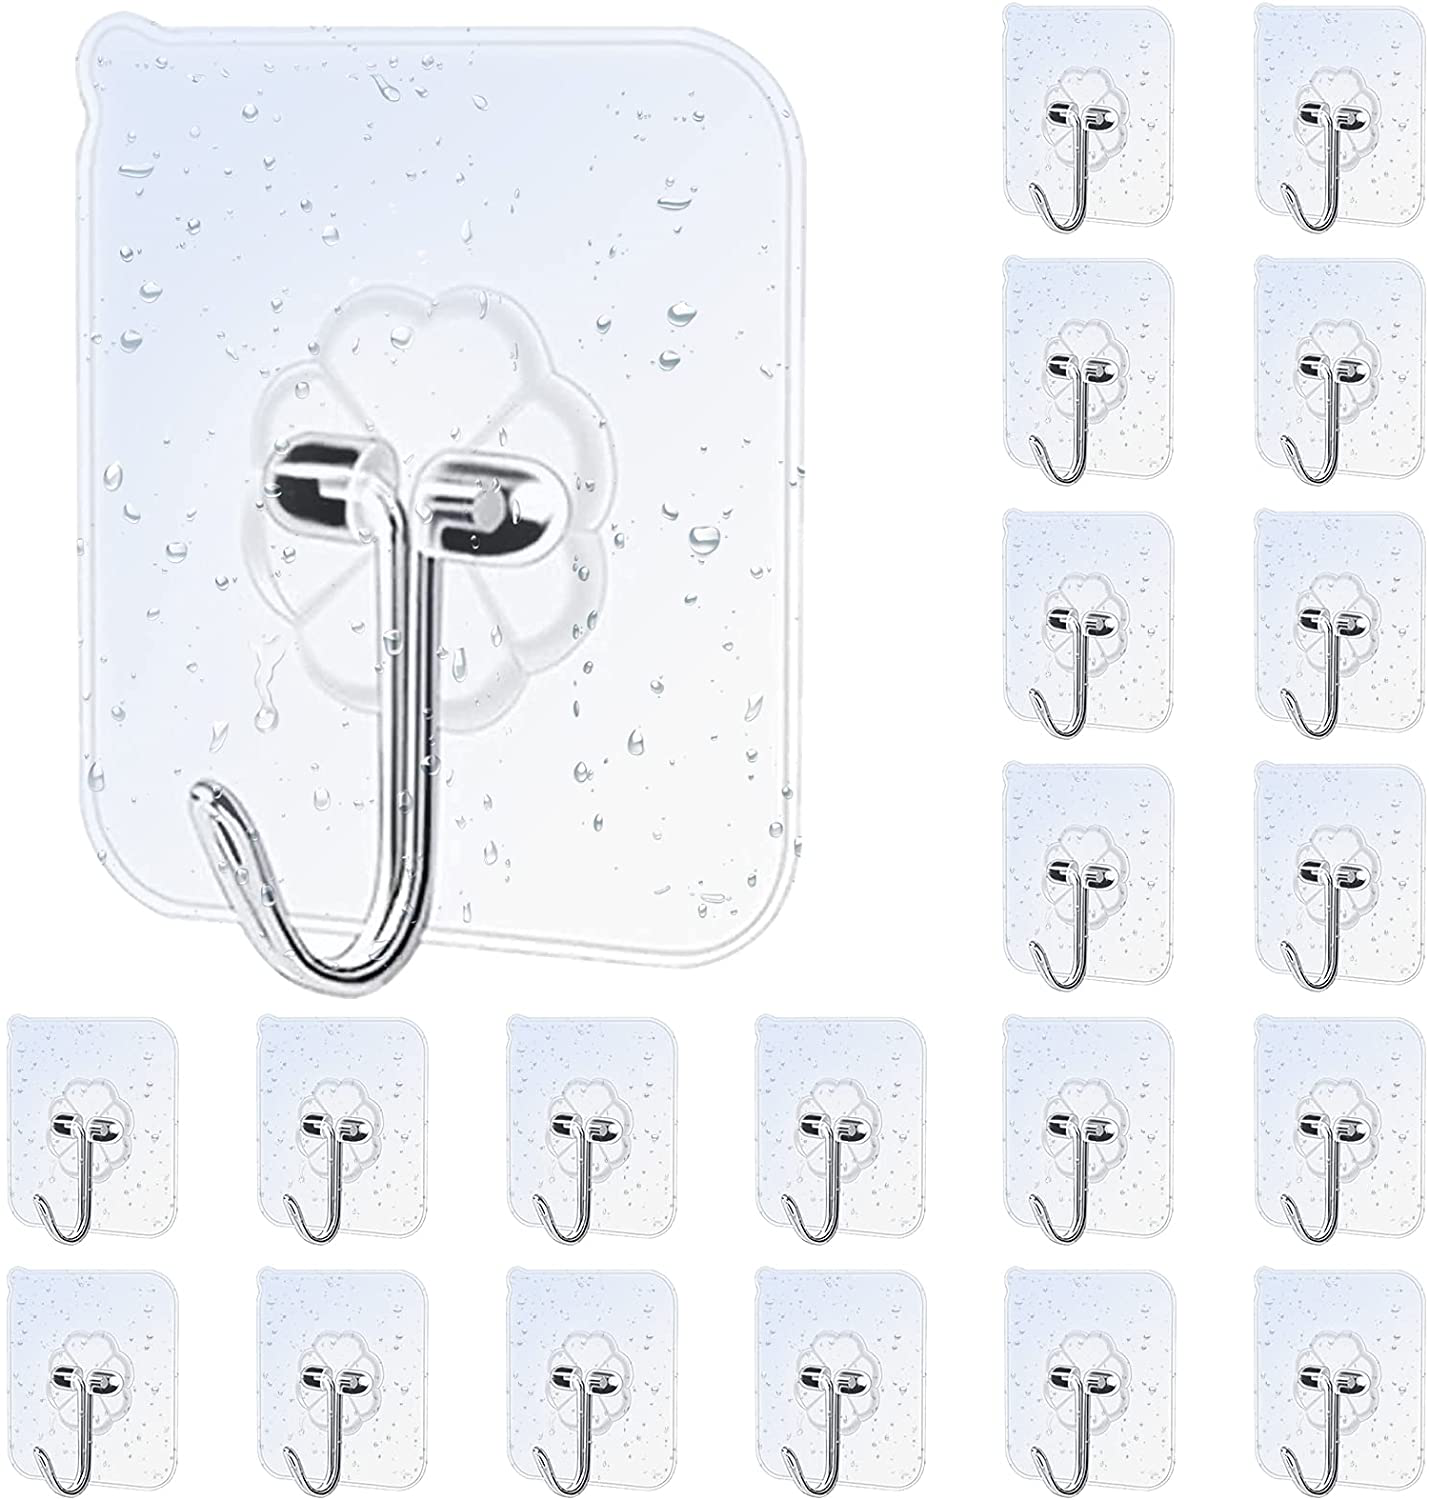 Angyues Adhesive Wall Hooks,20 Pieces Waterproof Oilproof Bathroom and Kitchen Heavy Duty Adhesive Hooks , Transparent Practical Wall Hook Coat Hooks, Ceiling Hooks for Hanging Plants13 Pounds (Max)